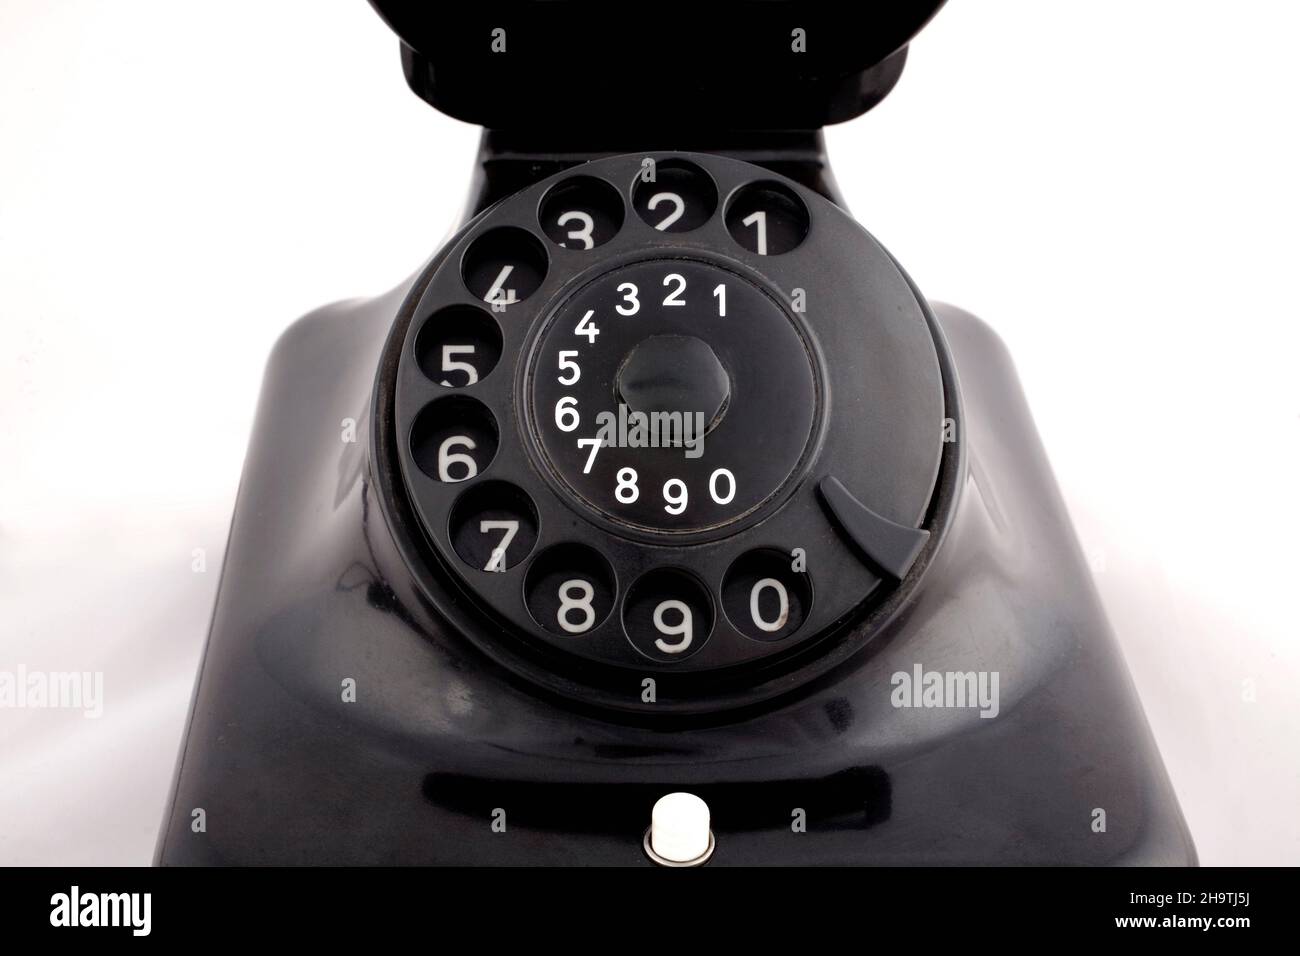 old black rotary phone, cut out Stock Photo